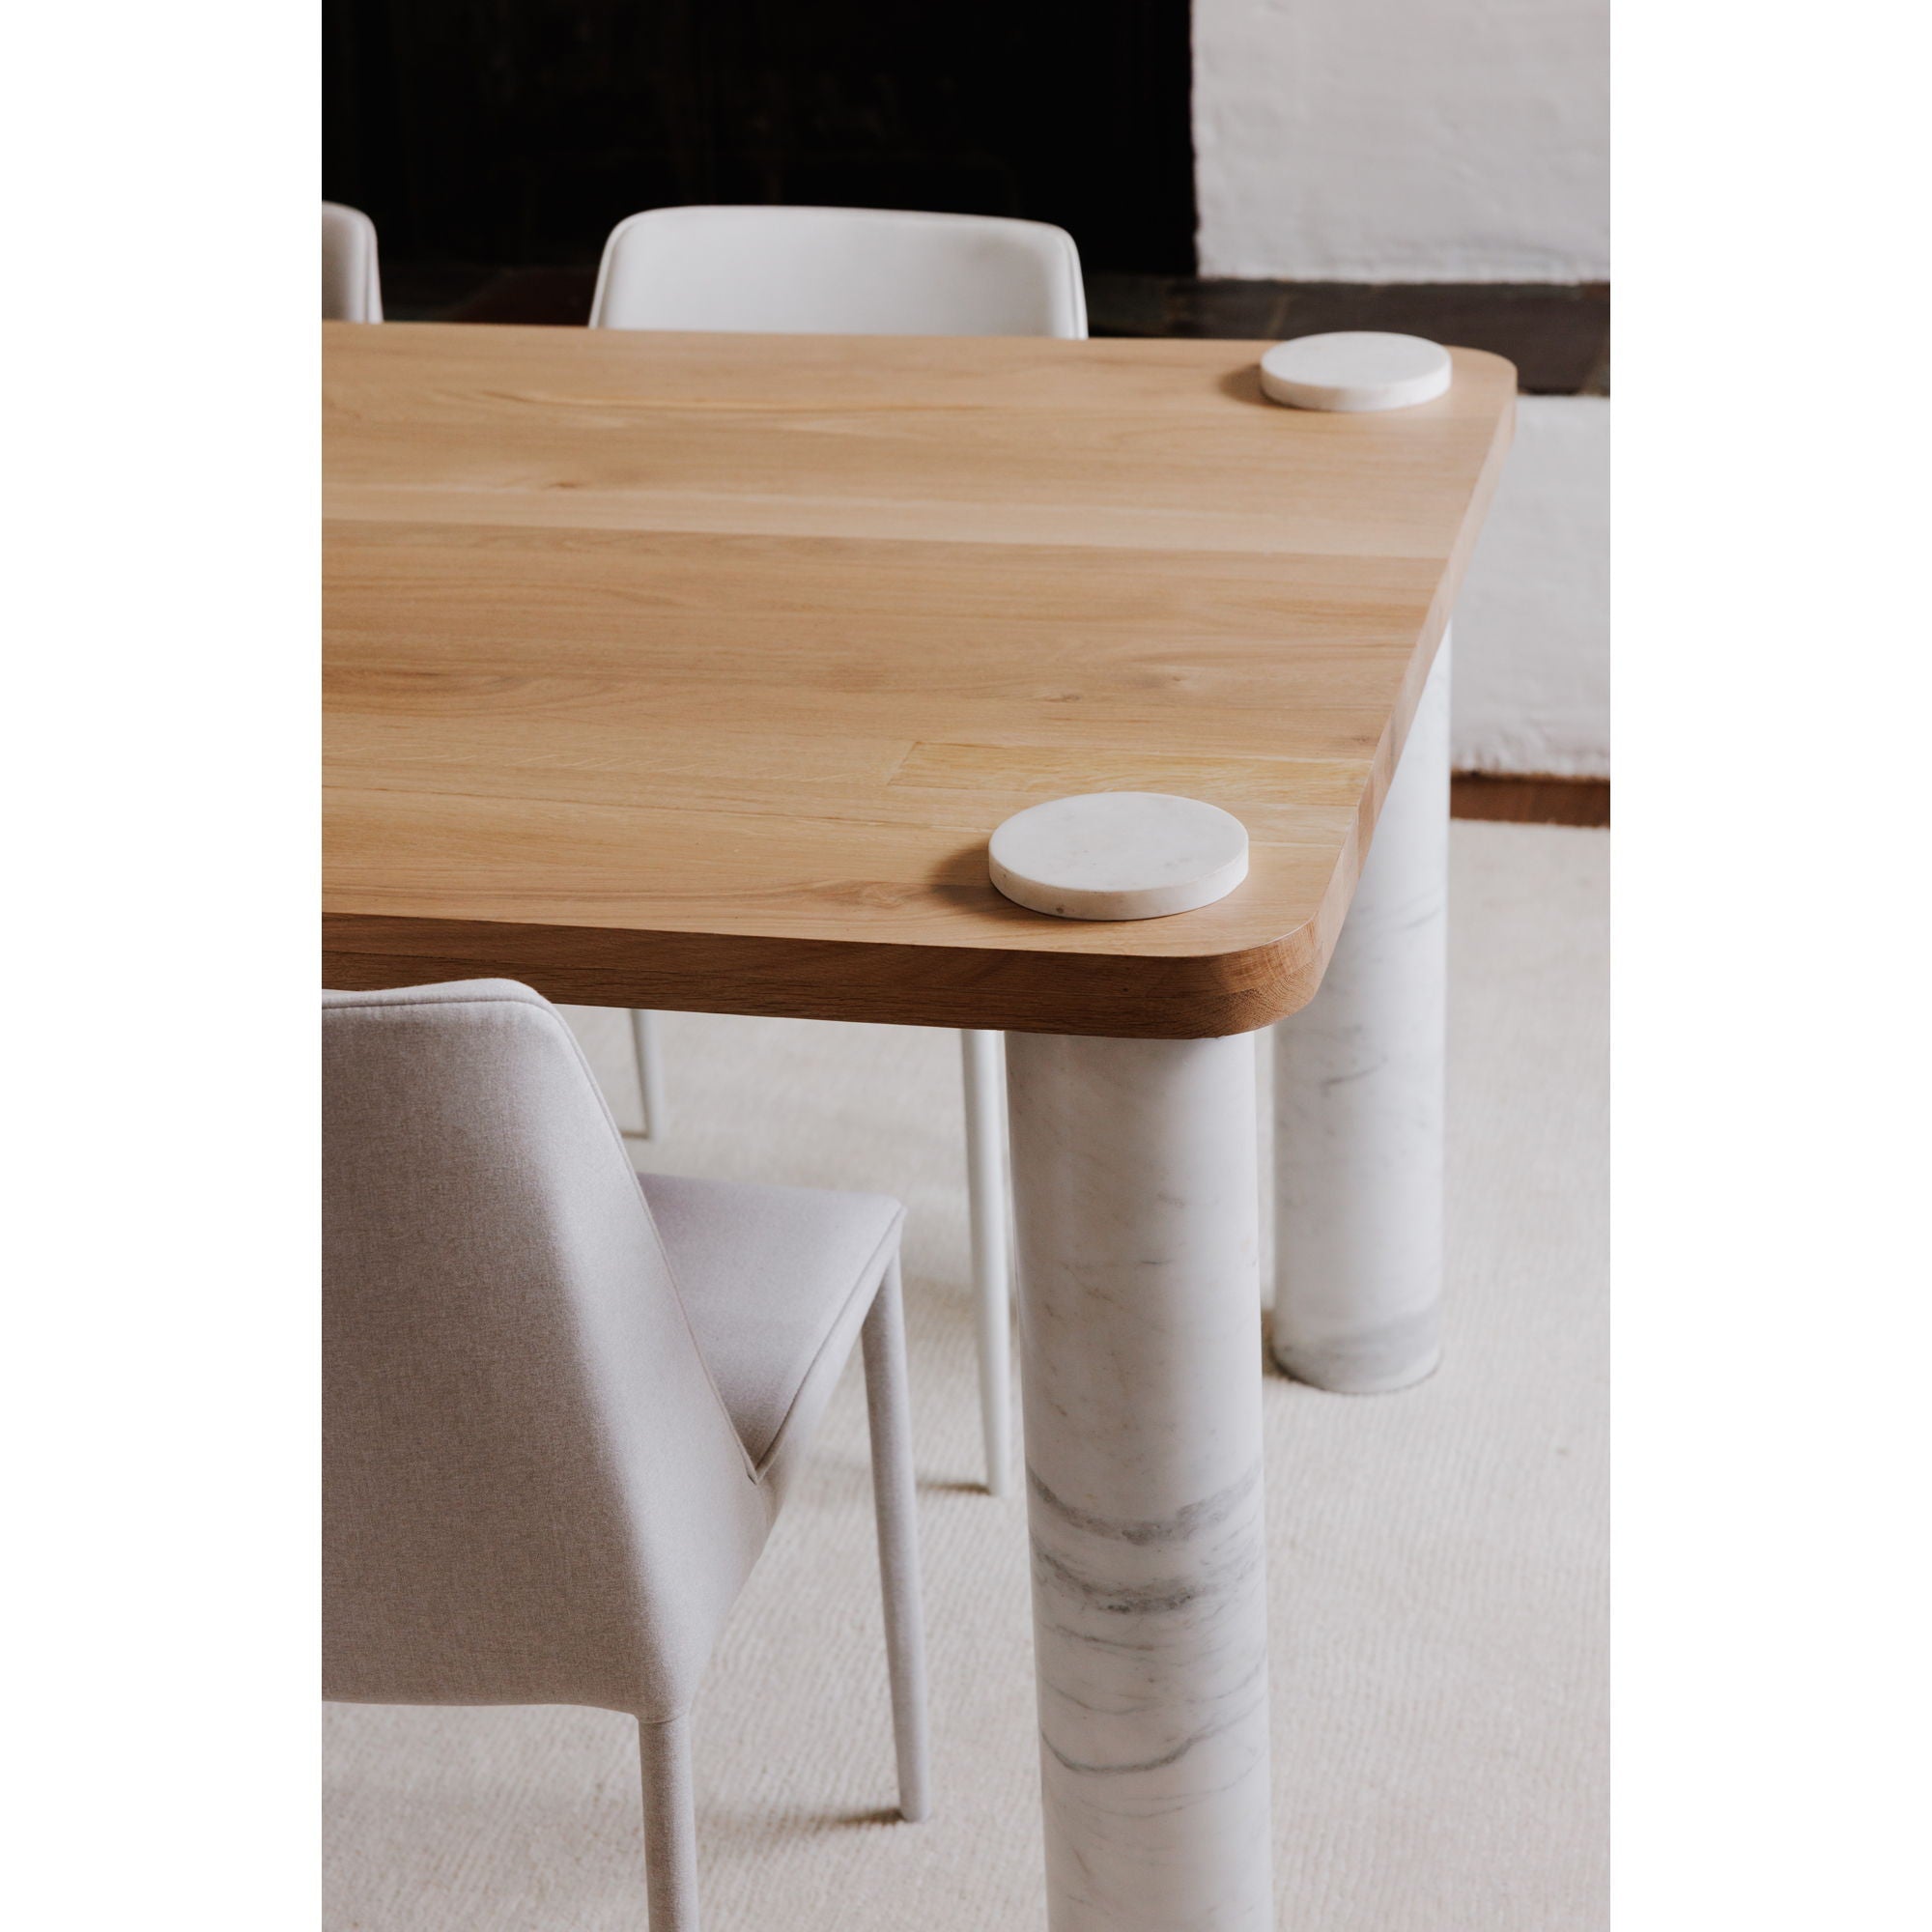 Century - Dining Table - Natural